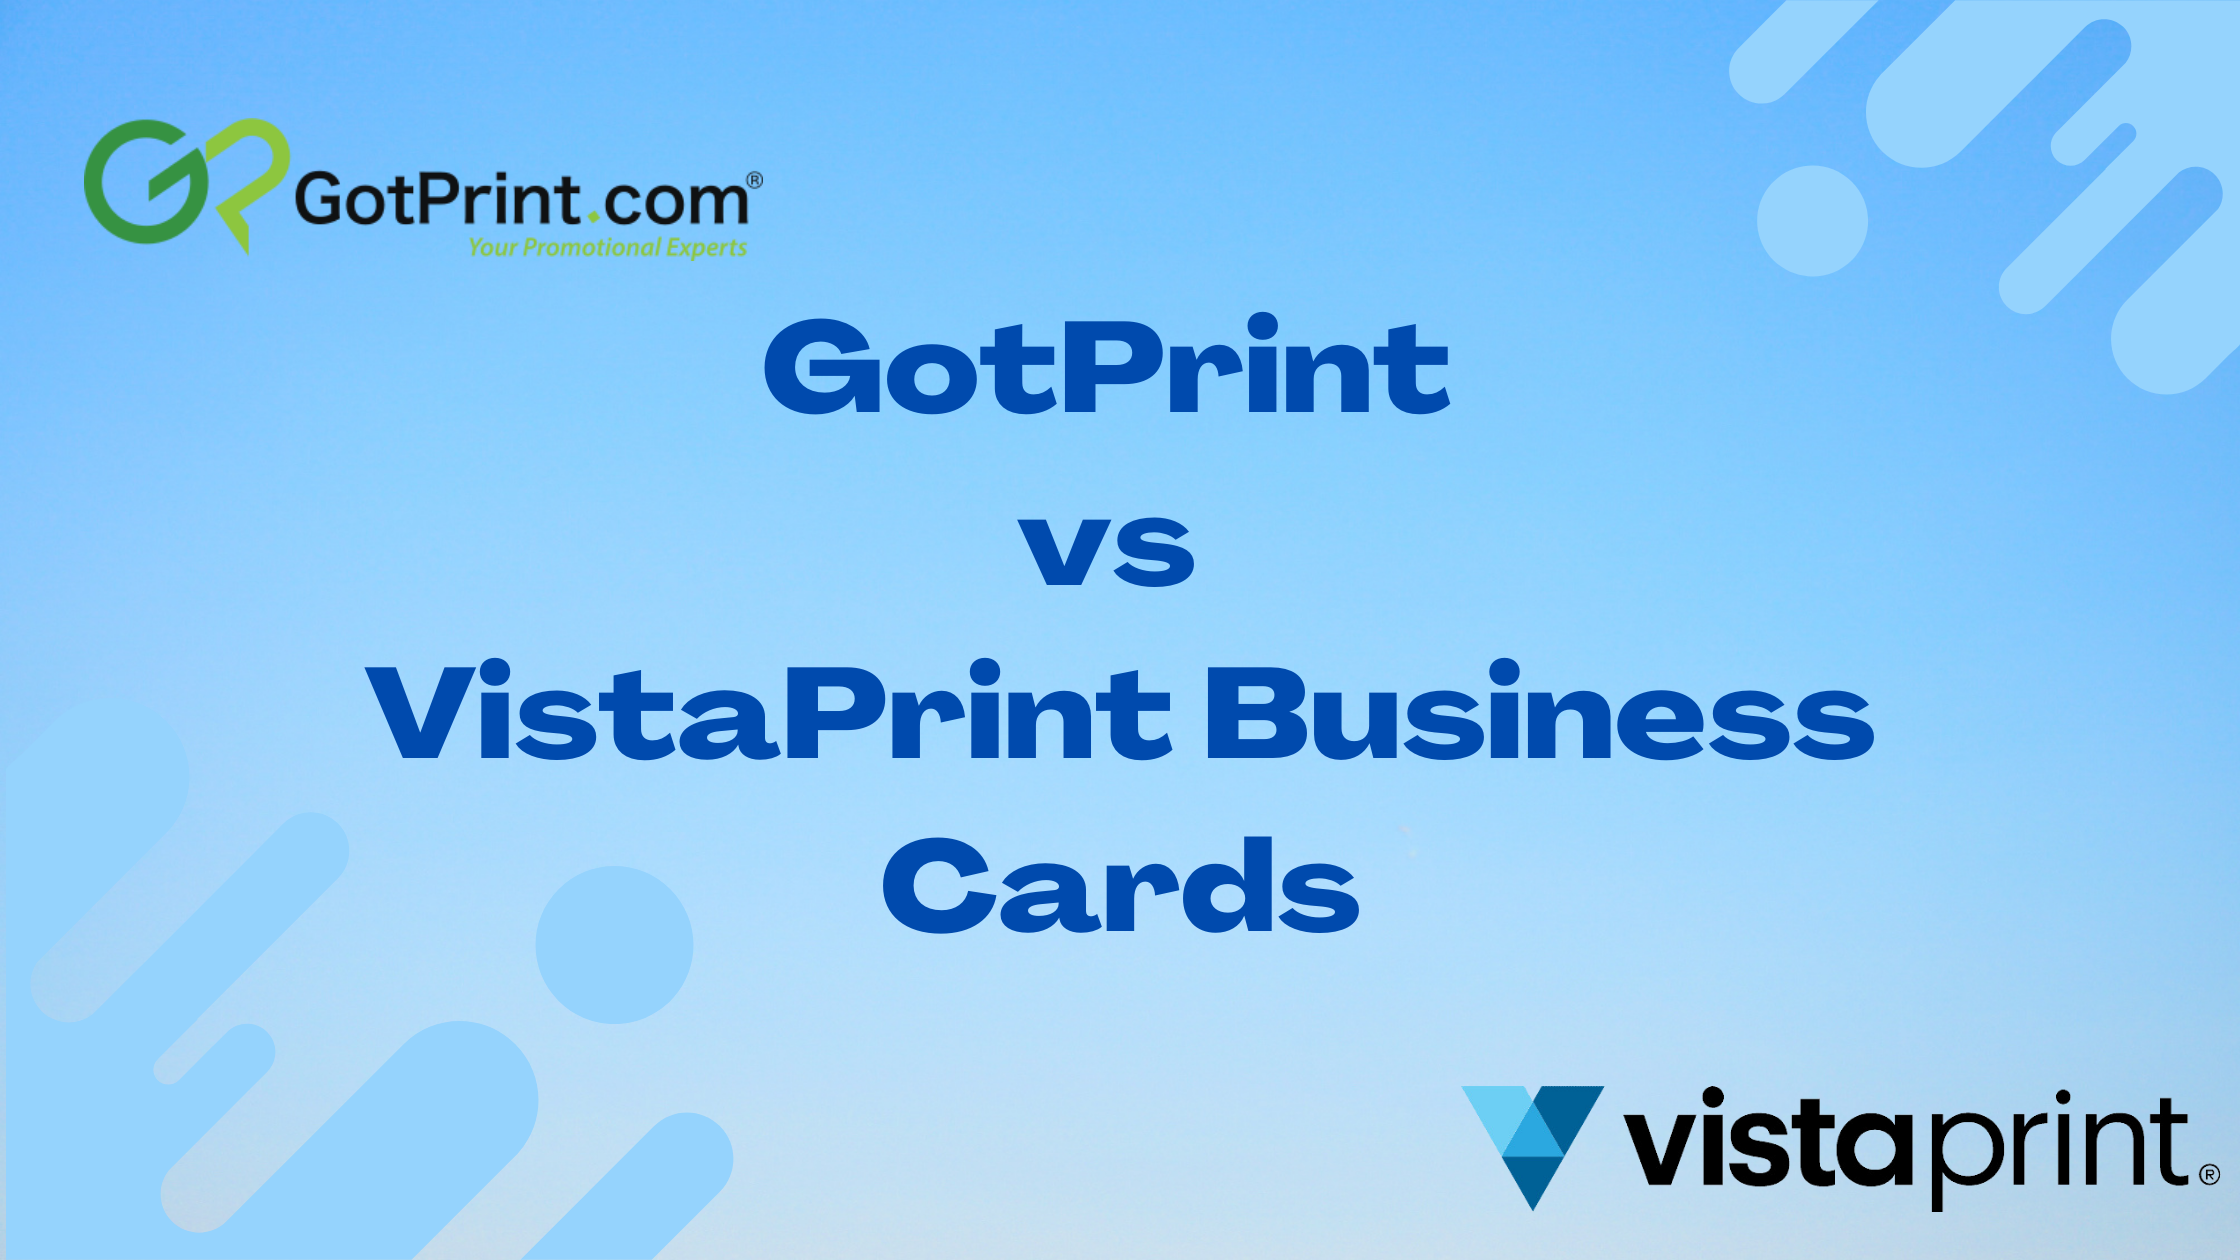 GotPrint Coupons, Promo Codes, & Offers